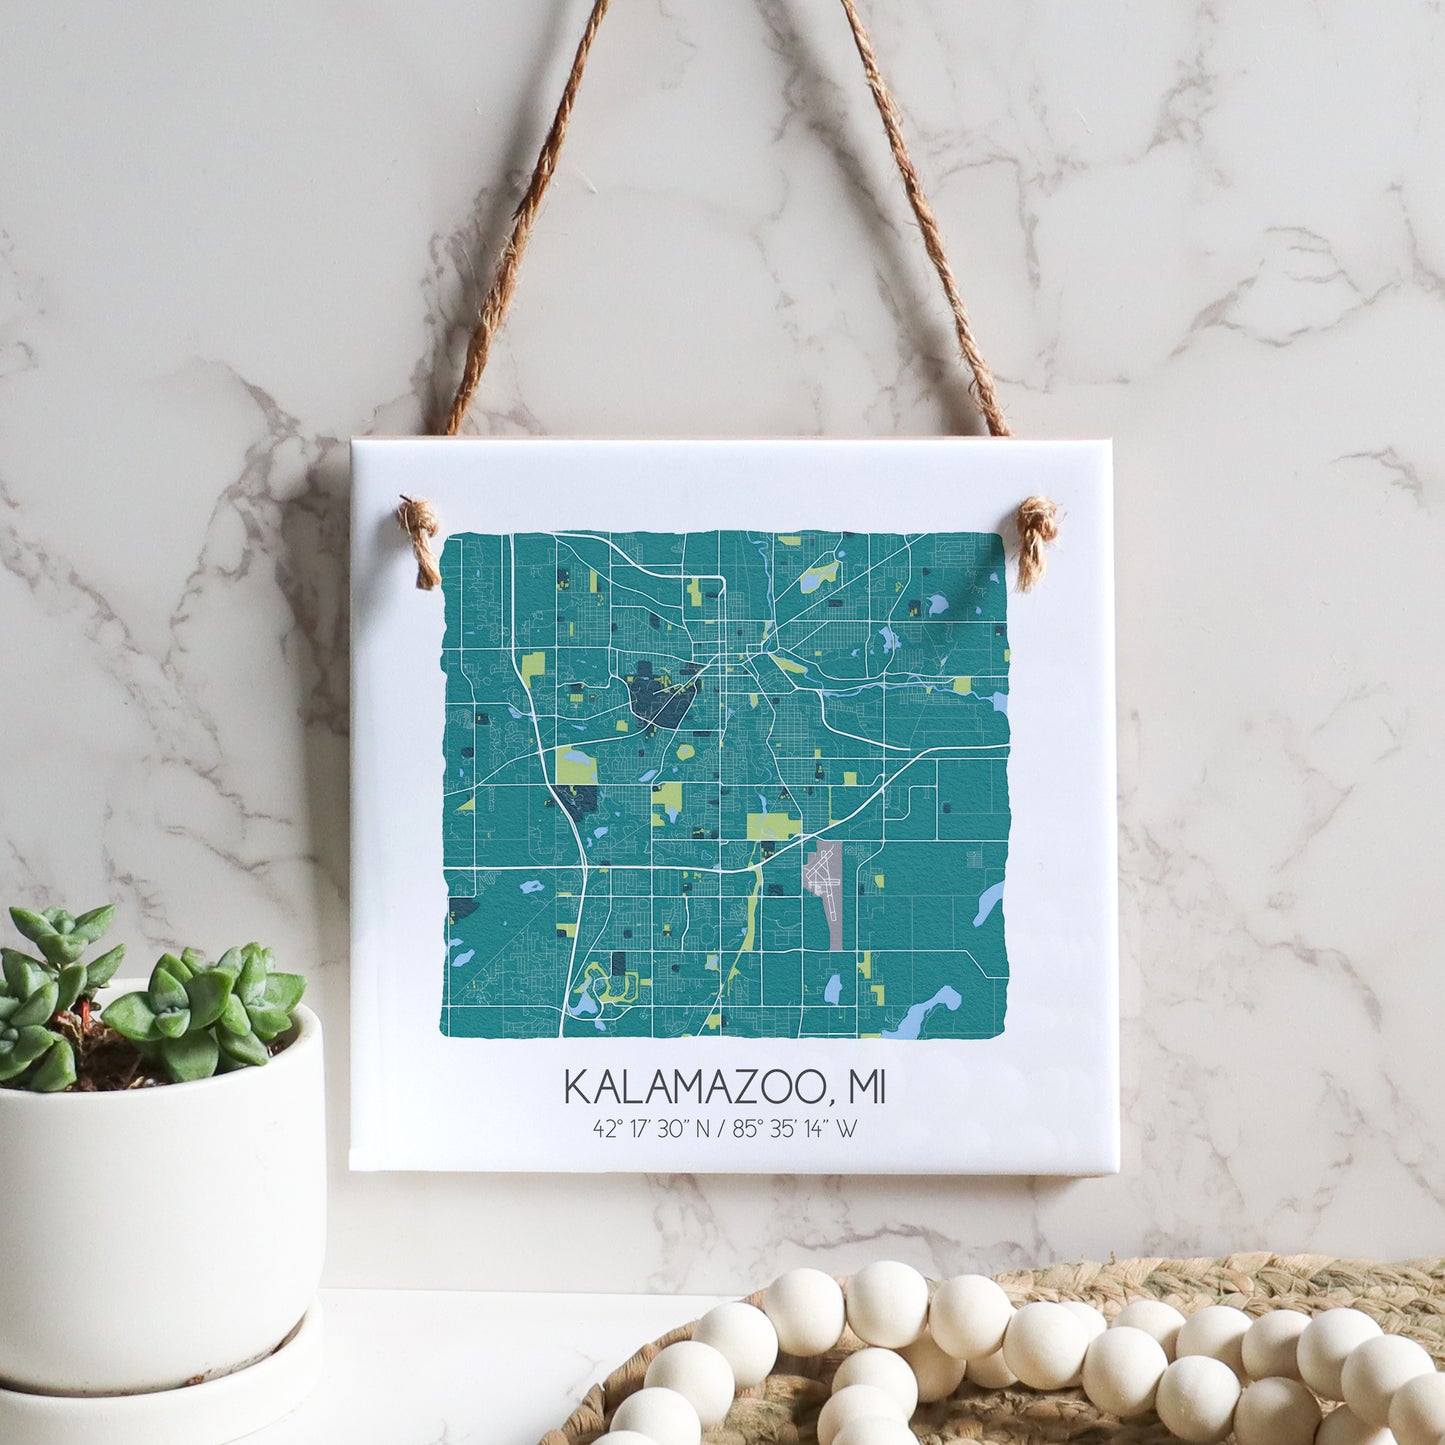 A city map of Kalamazoo MI on a square ceramic tile sign hanging on a wall, in the color teal